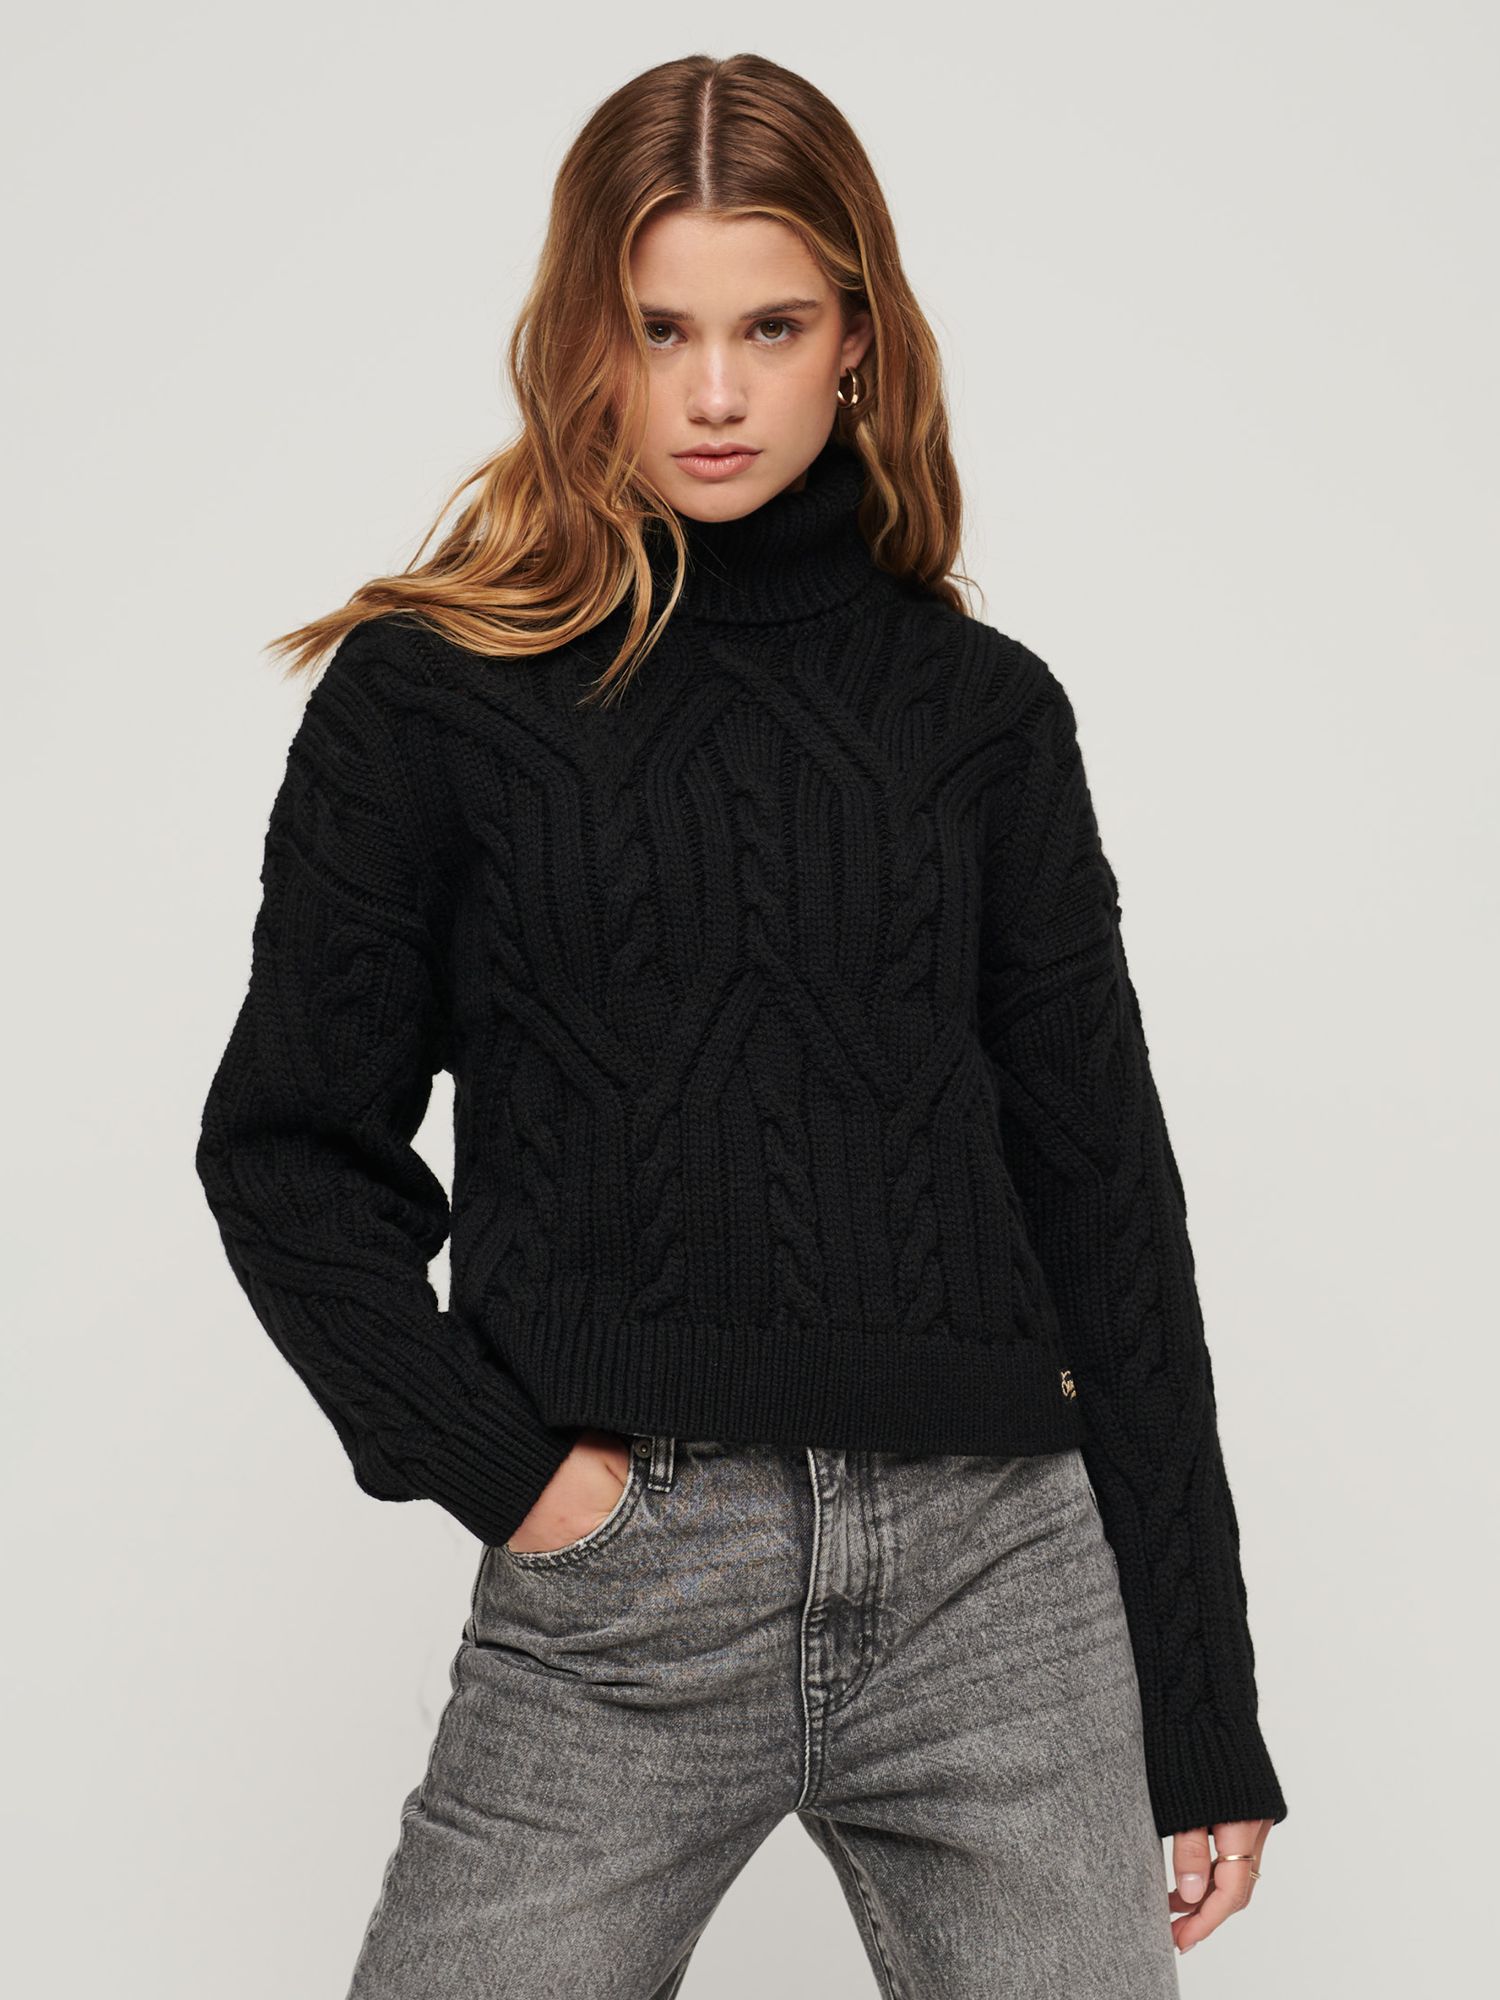 Superdry Ywist Cable Wool Blend Knit Jumper, Black at John Lewis & Partners